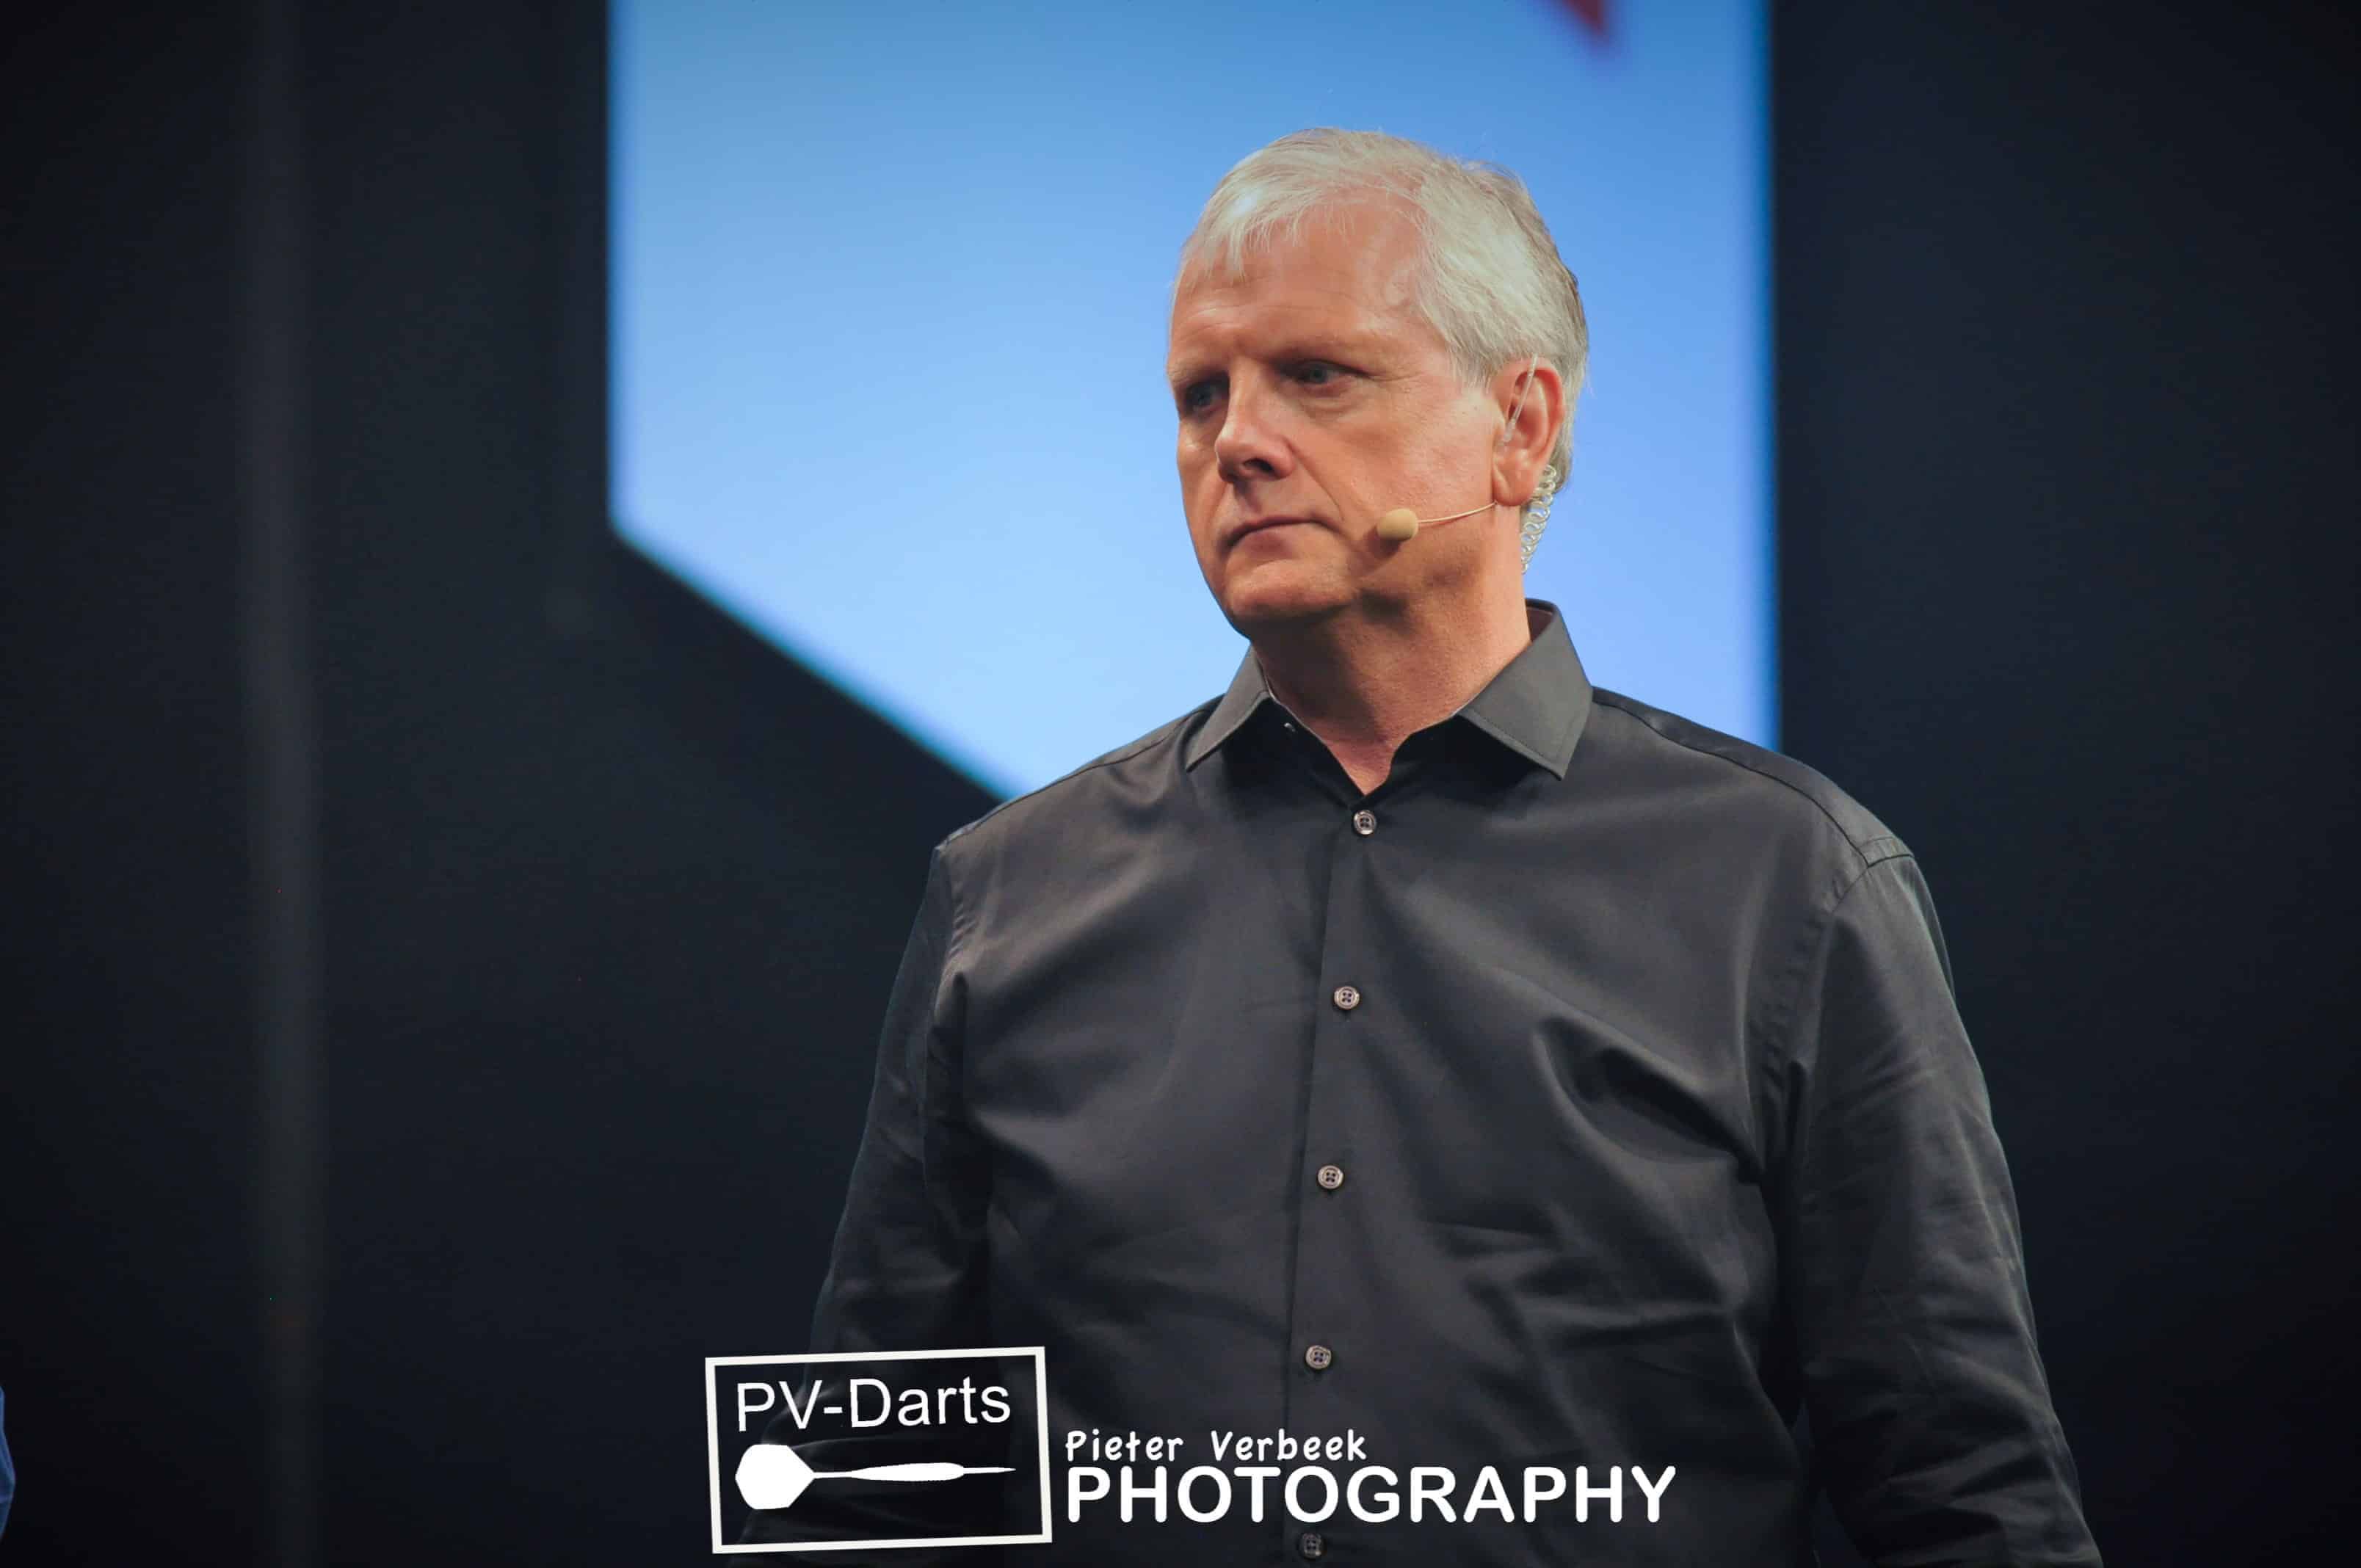 Harrington tackles PDC gamesmanship and rankings in interview